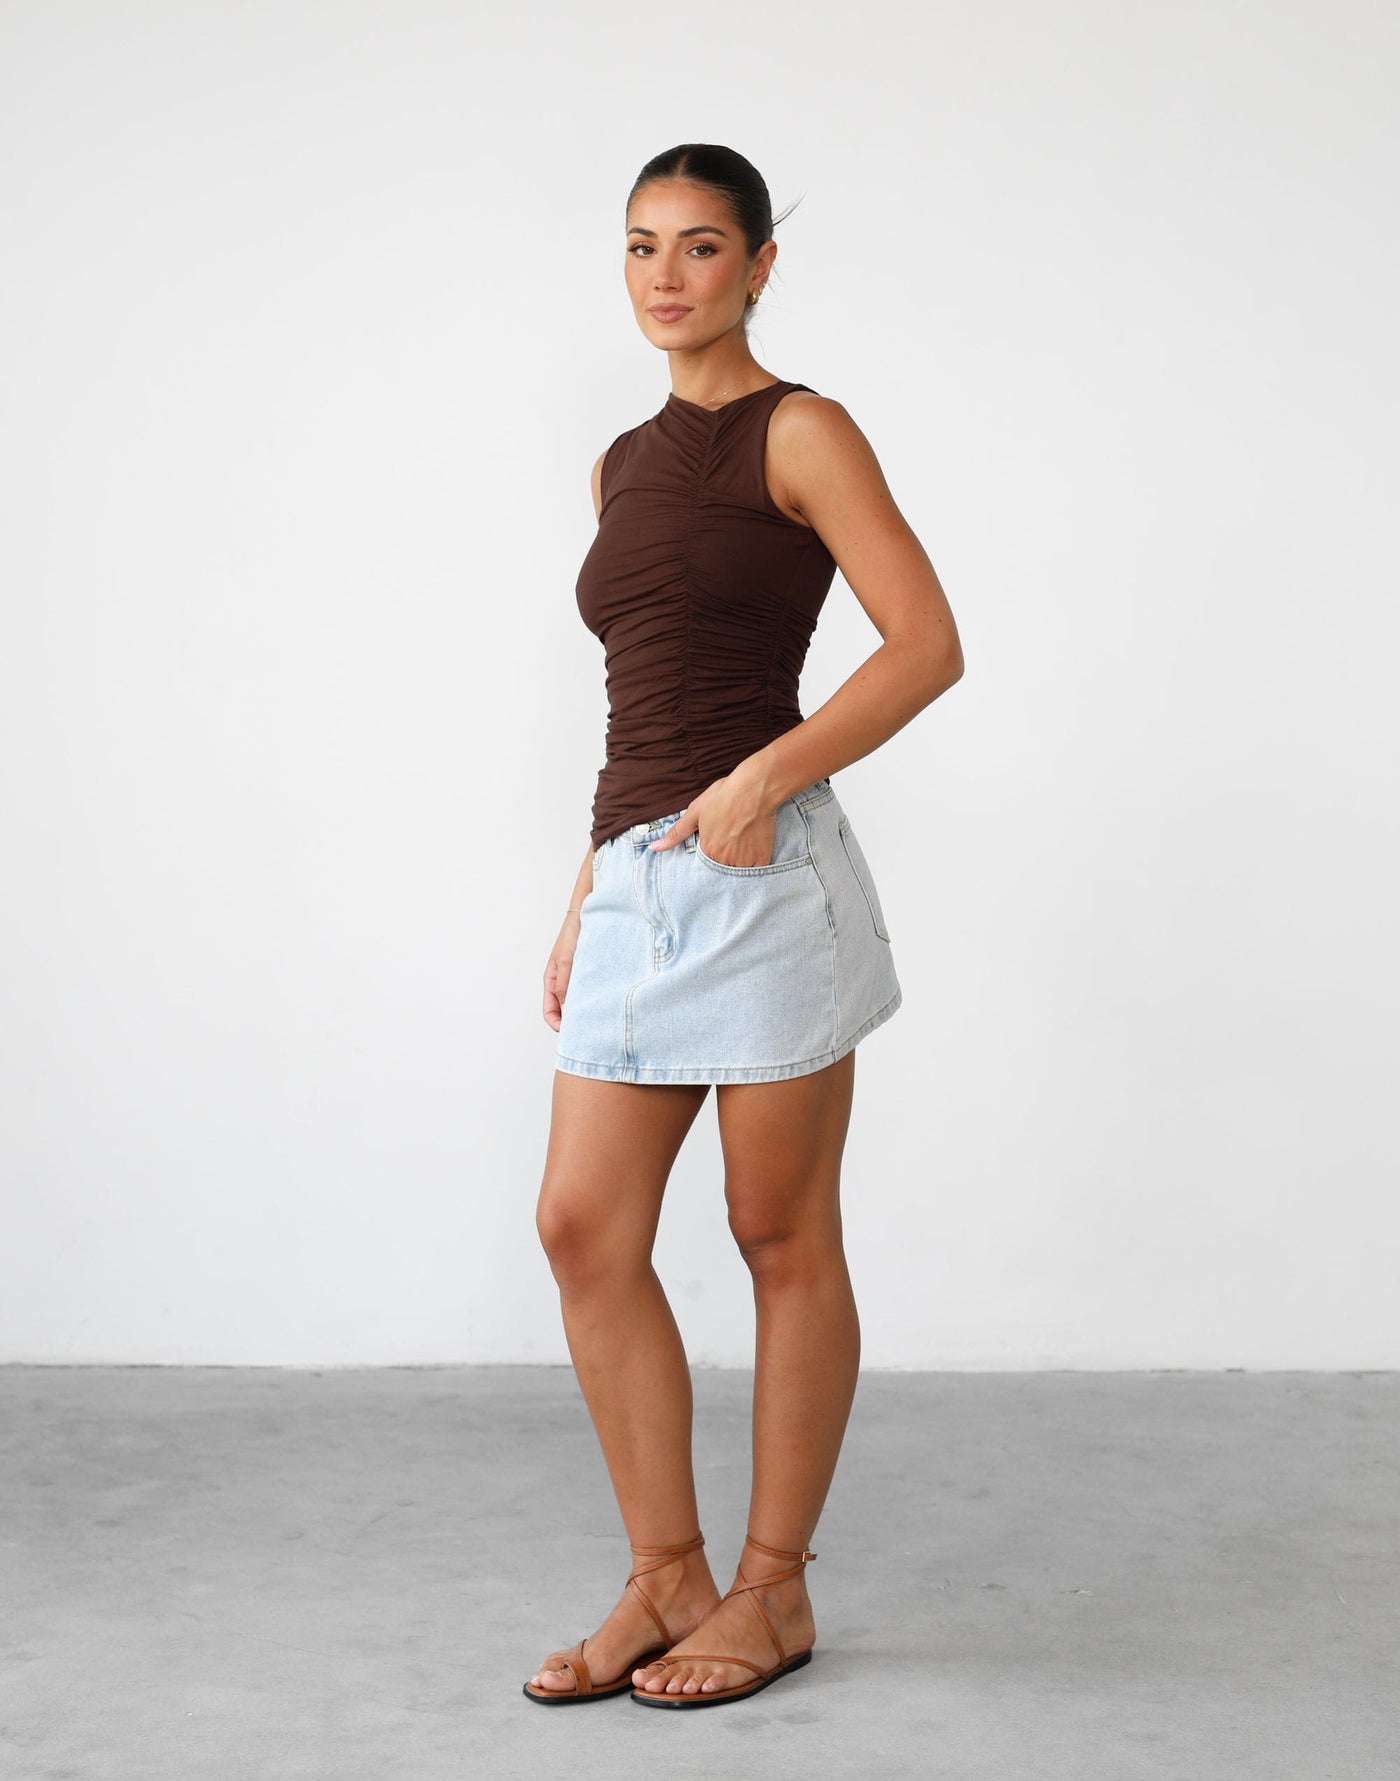 Delphine Tank Top (Chocolate) - Bodycon Jersey Gathered Detail Top - Women's Top - Charcoal Clothing